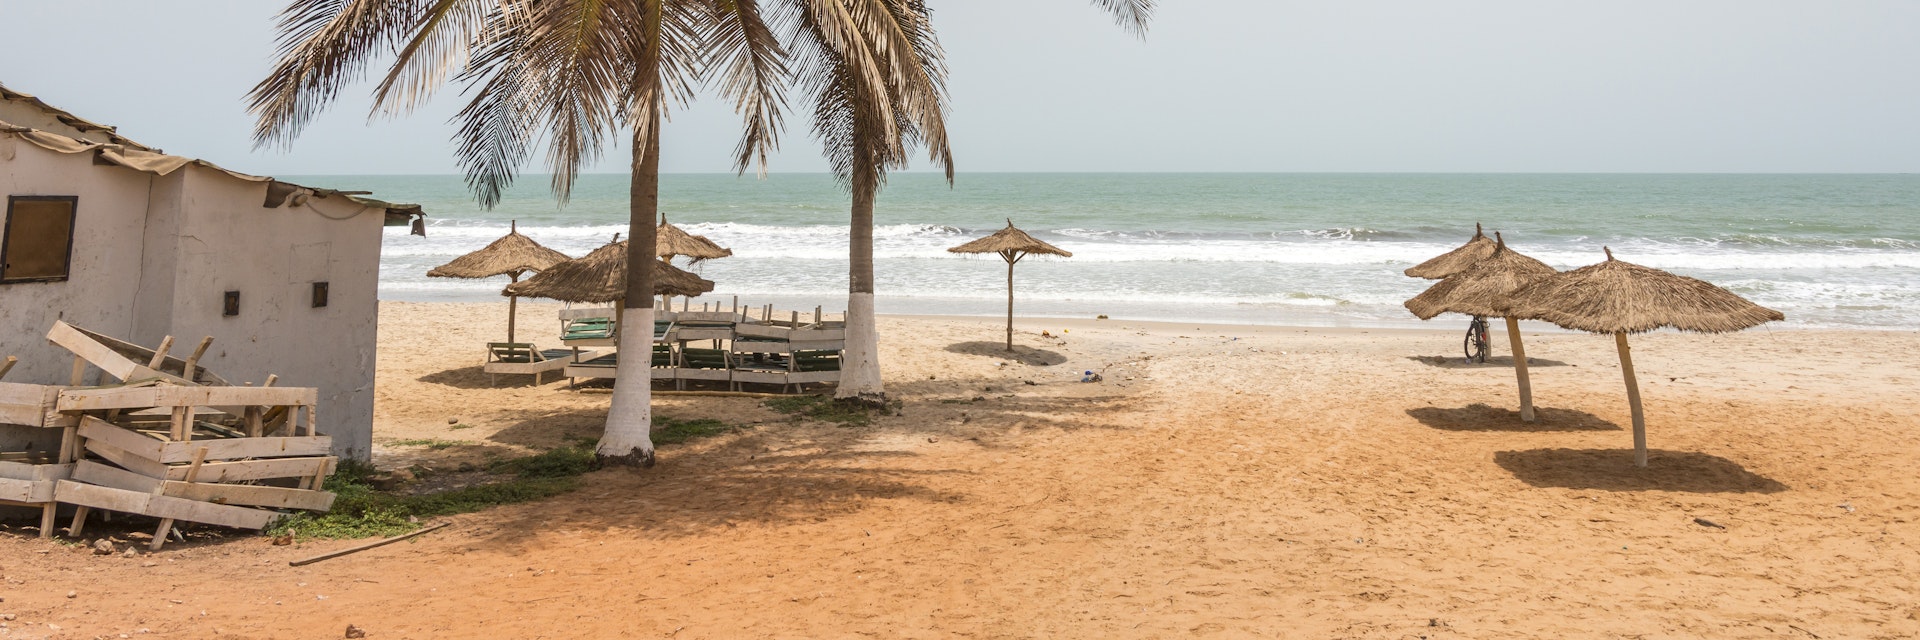 Palm trees and rustic umbrellas on a beach on the coast of Serekunda in Gambia